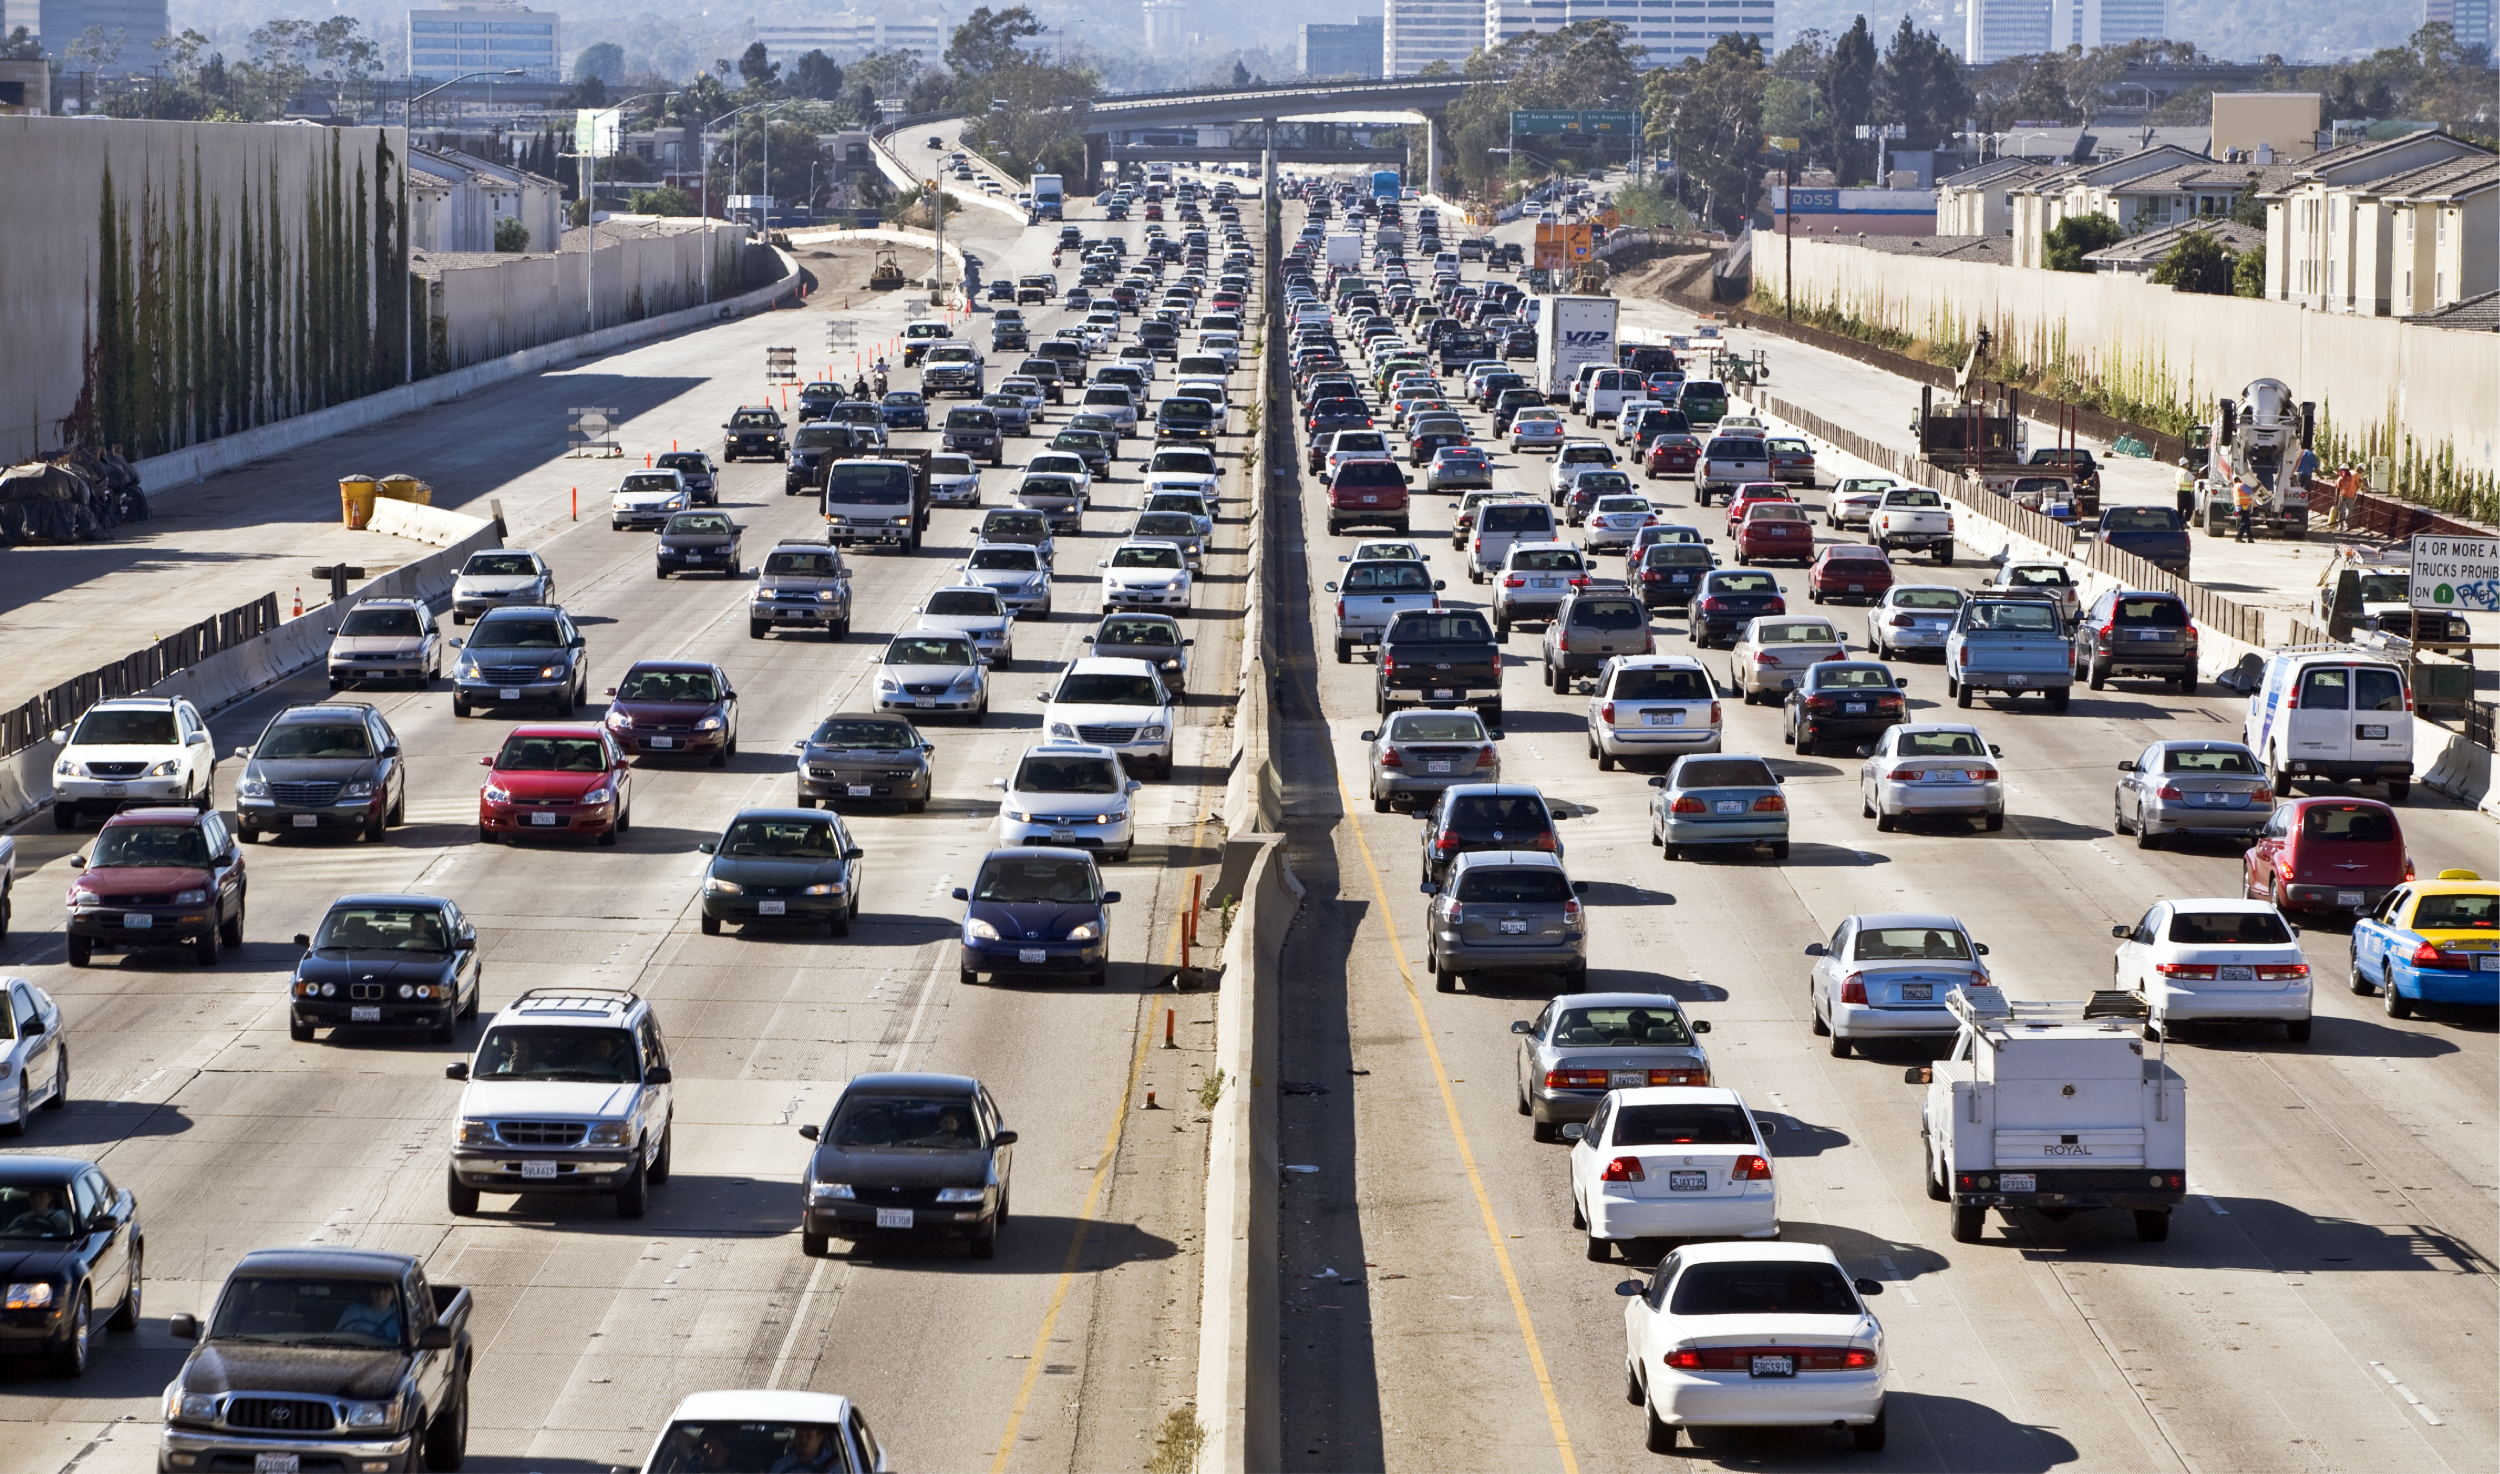 Portion of the 405 freeway congested across 10 lanes of traffic